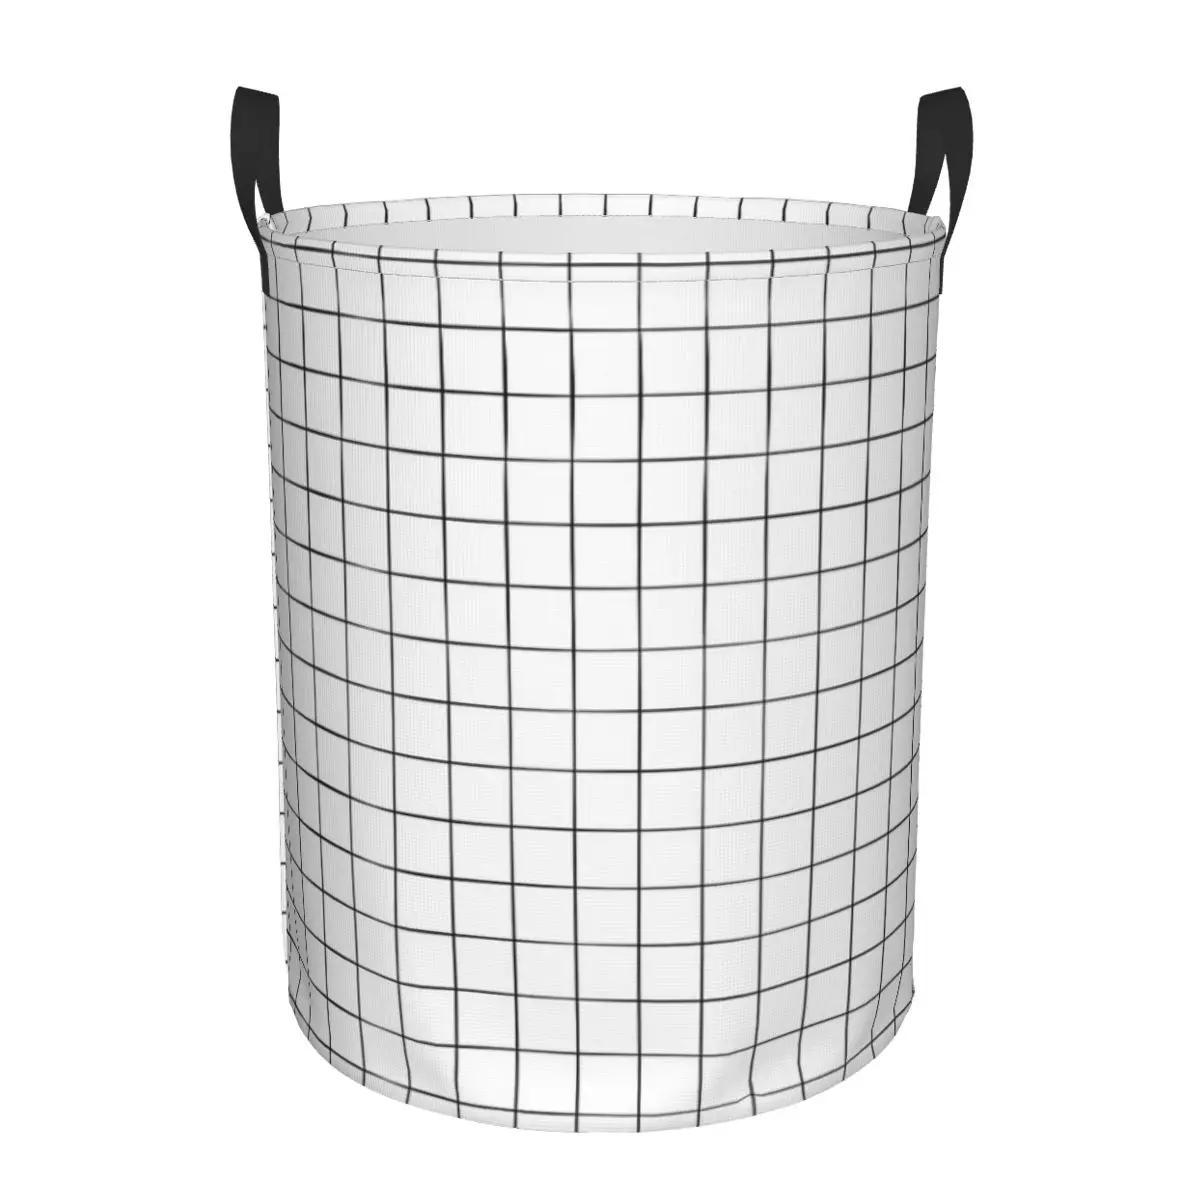 

White Grid Dirty Laundry Baskets Foldable Large Waterproof Clothes Toys Sundries Storage Basket For Home Kids Children's